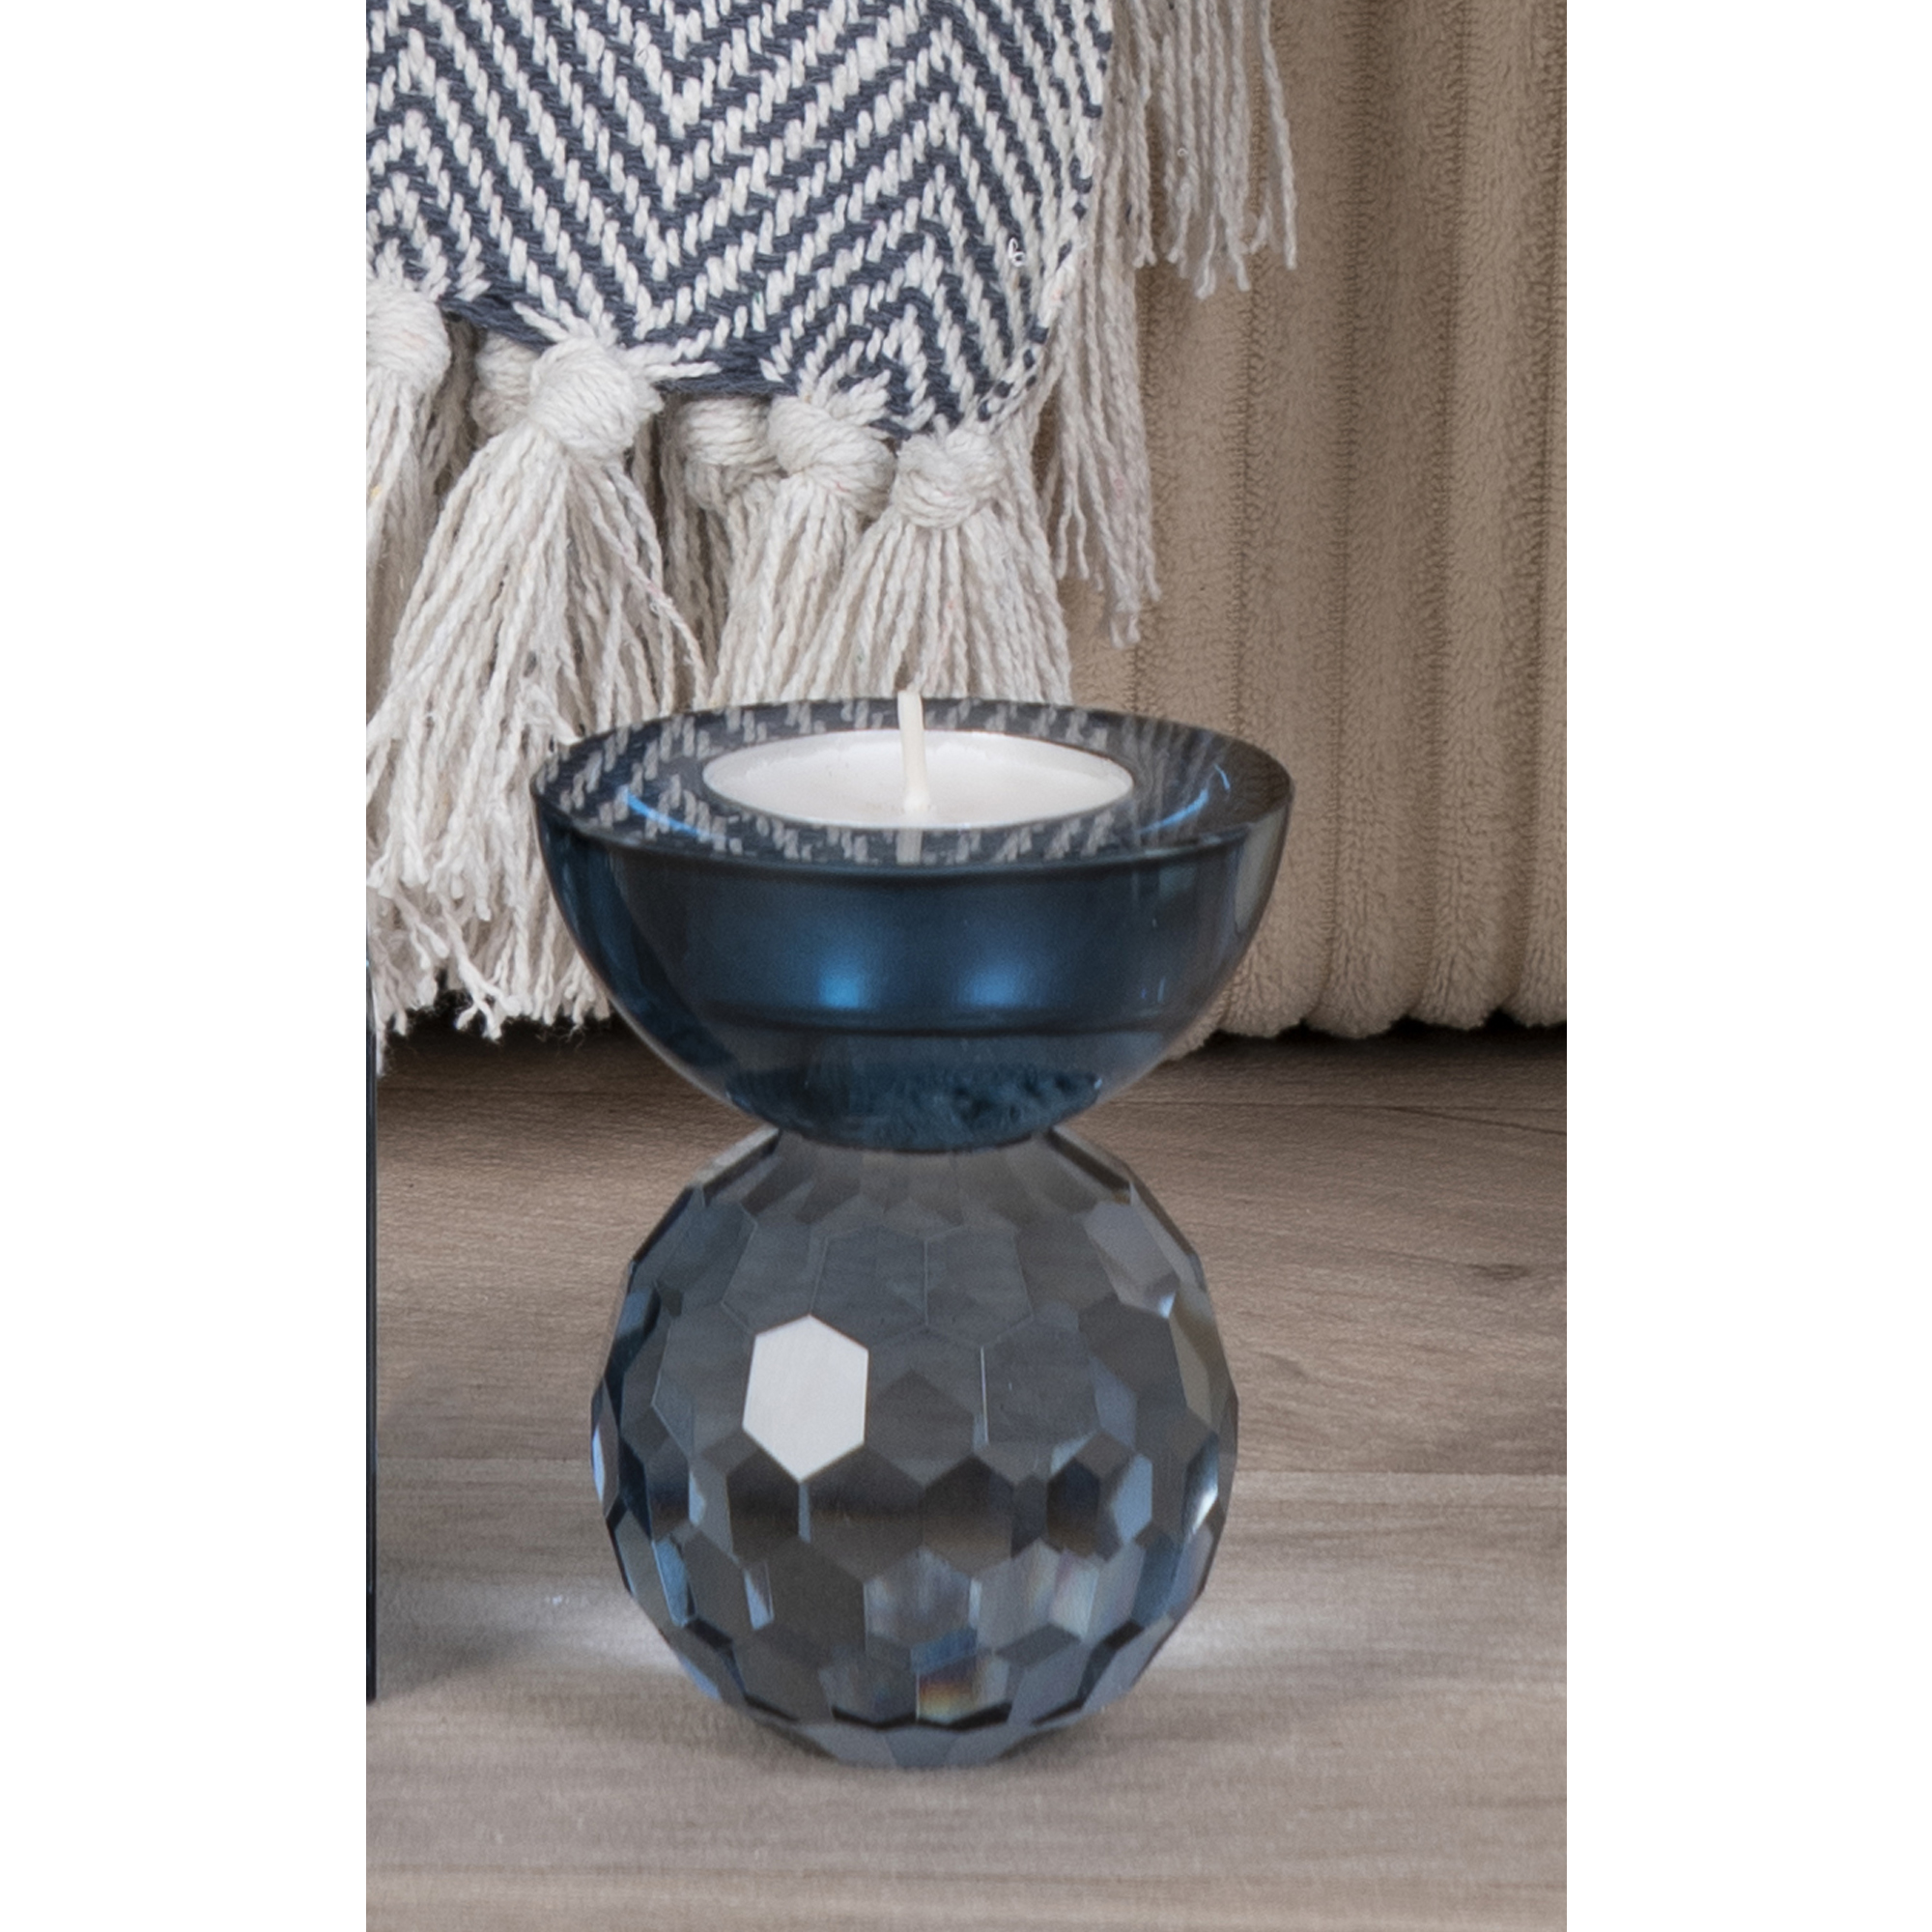 Burano Candle Holder - Candle holder in blue glass